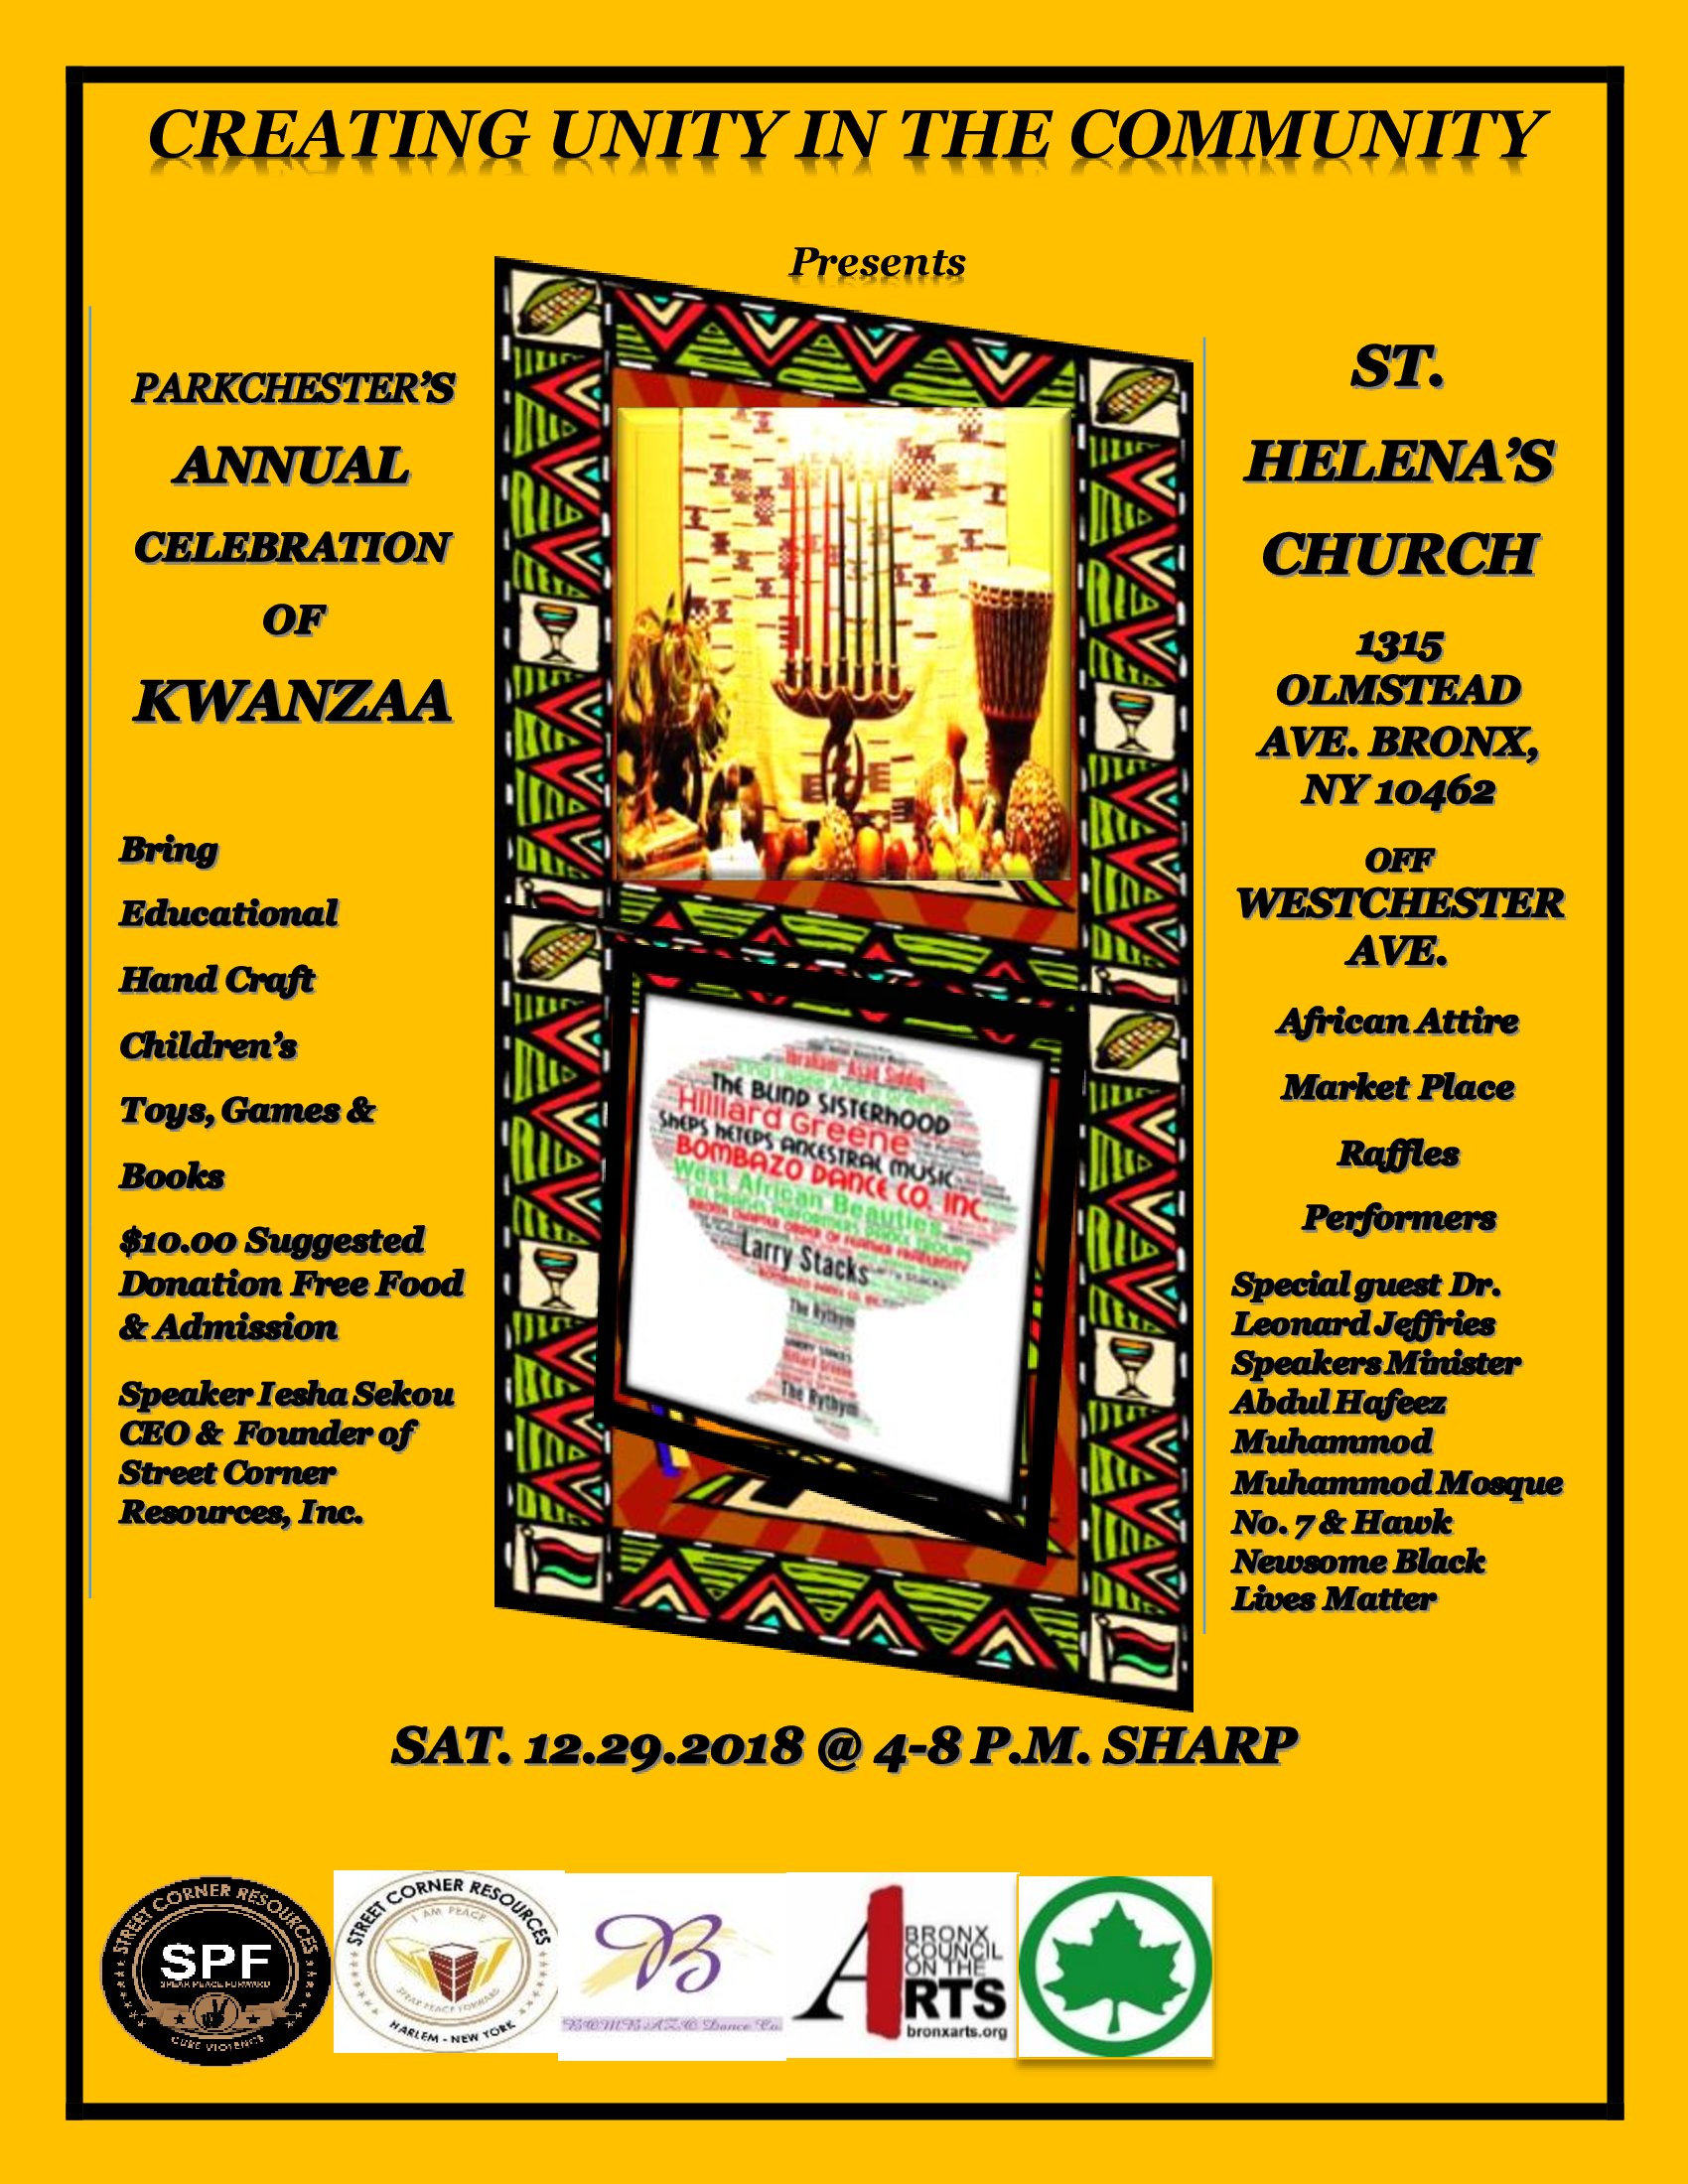 Parkchester’s Annual Celebration Of Kwanzaa